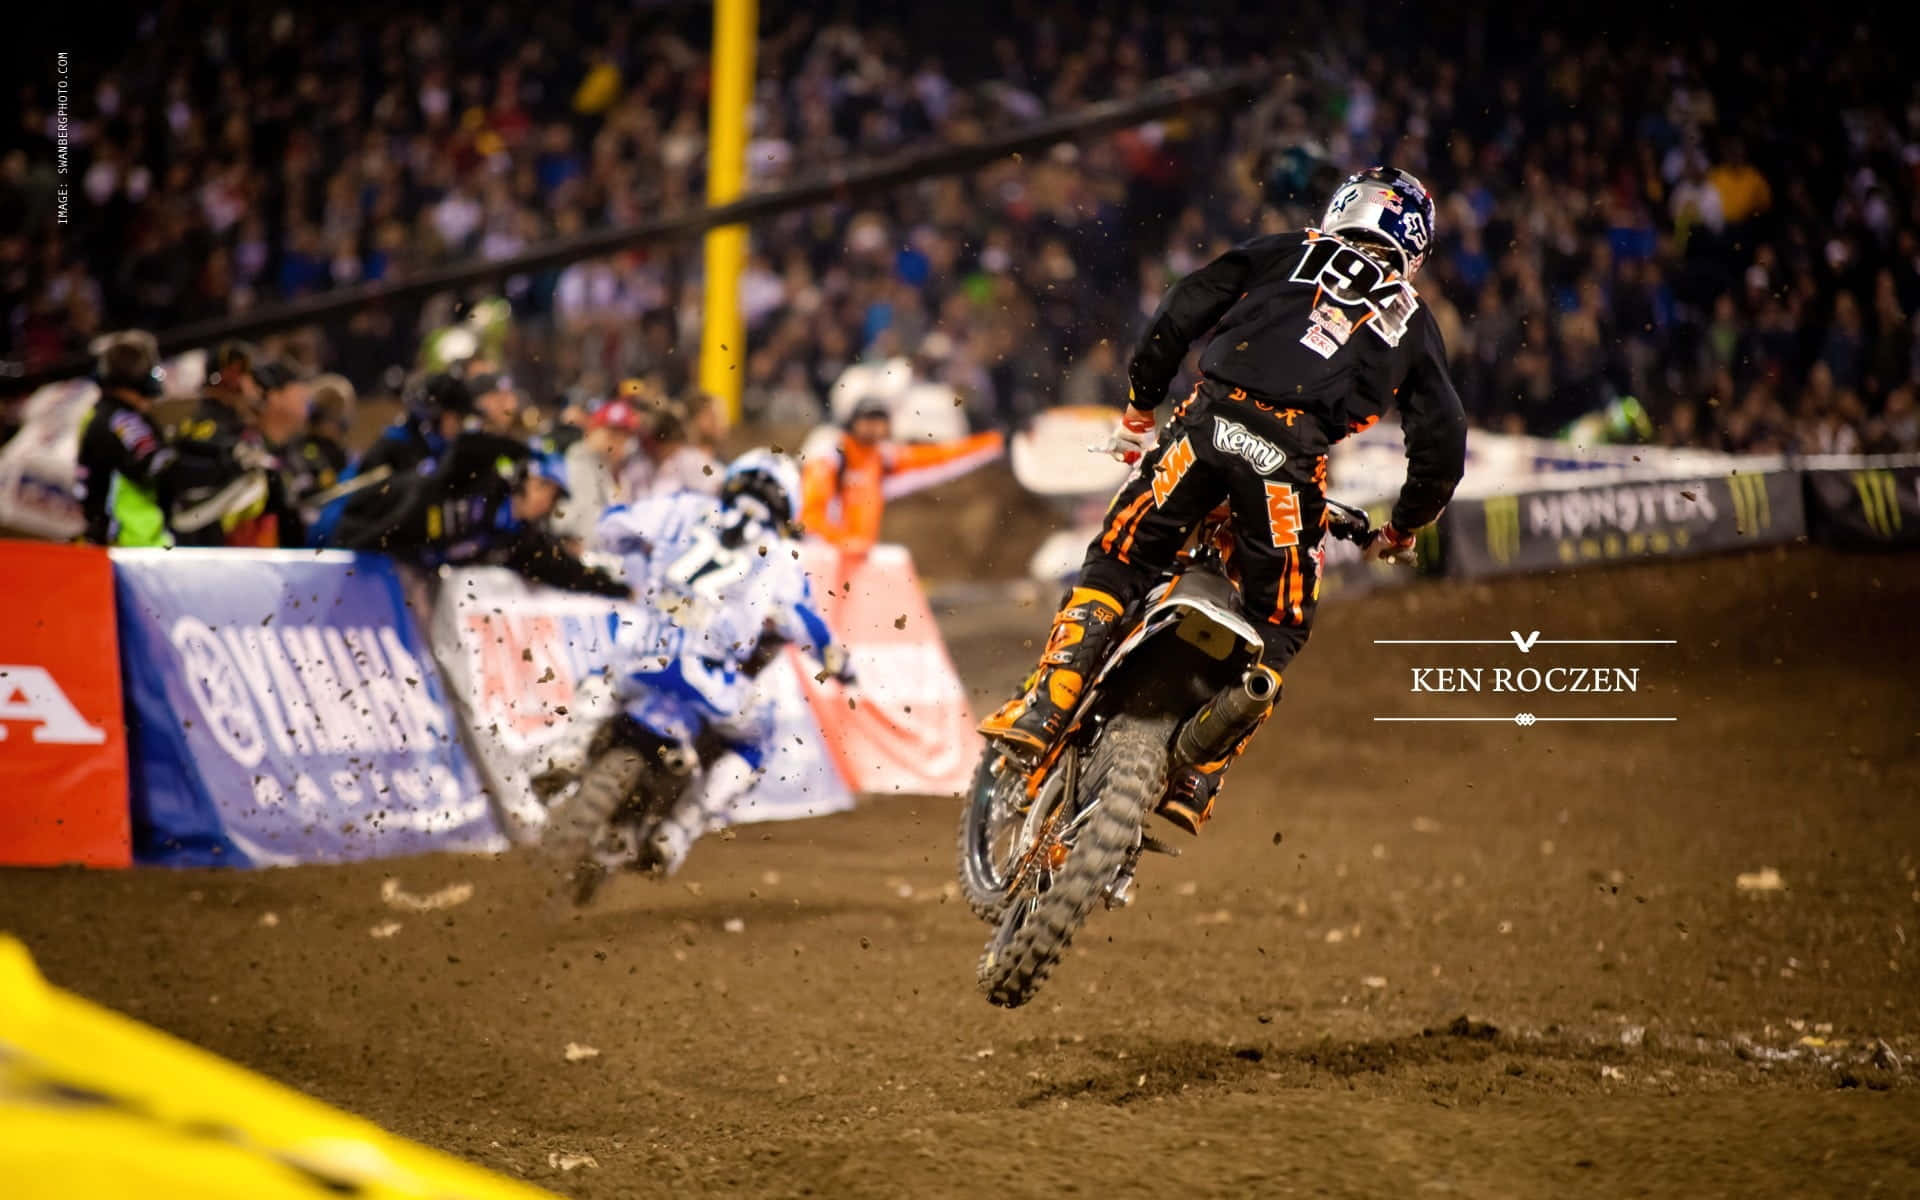 A Dirt Bike Rider Is In The Air During A Race Wallpaper